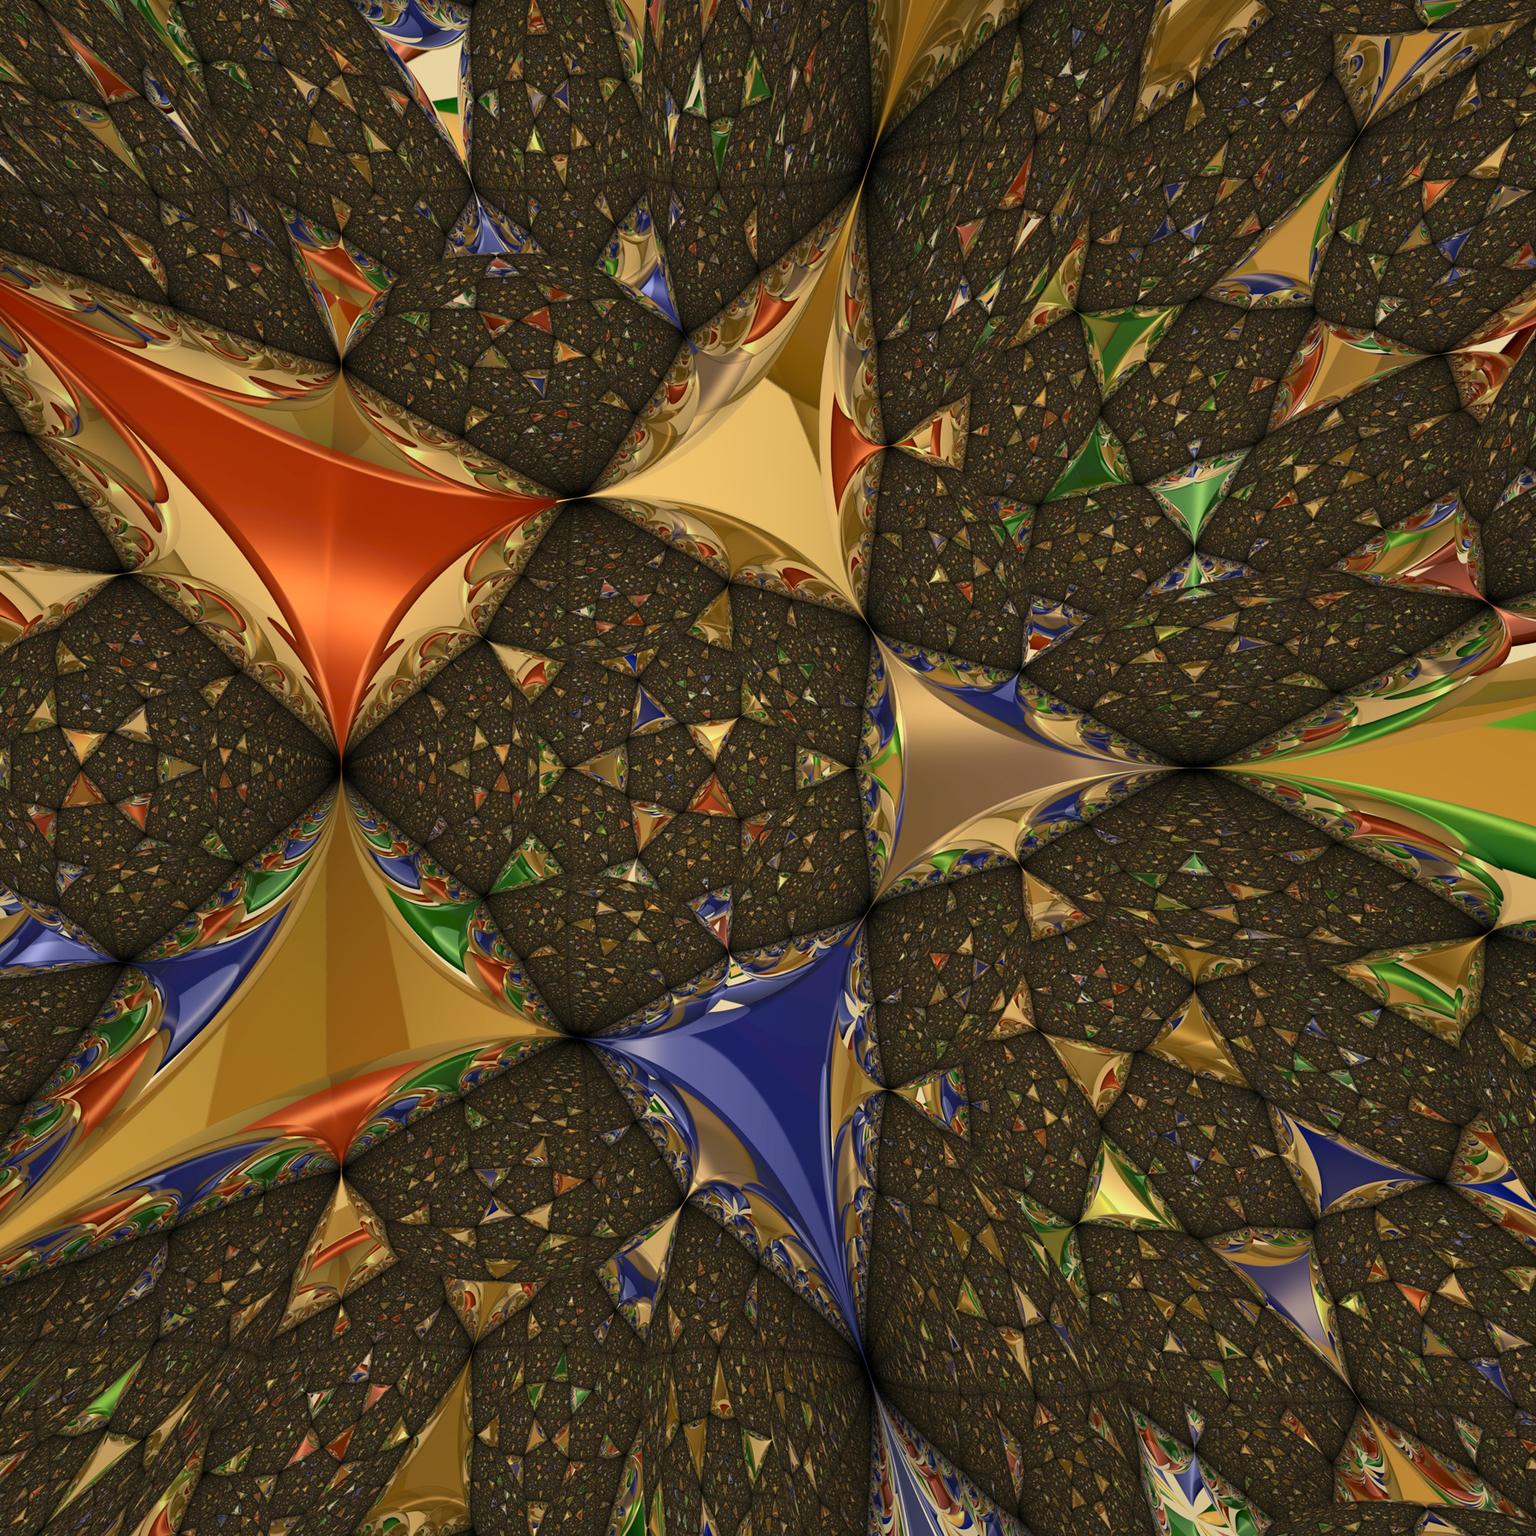 Image for entry 'Detail of Fractal Icosahedron'